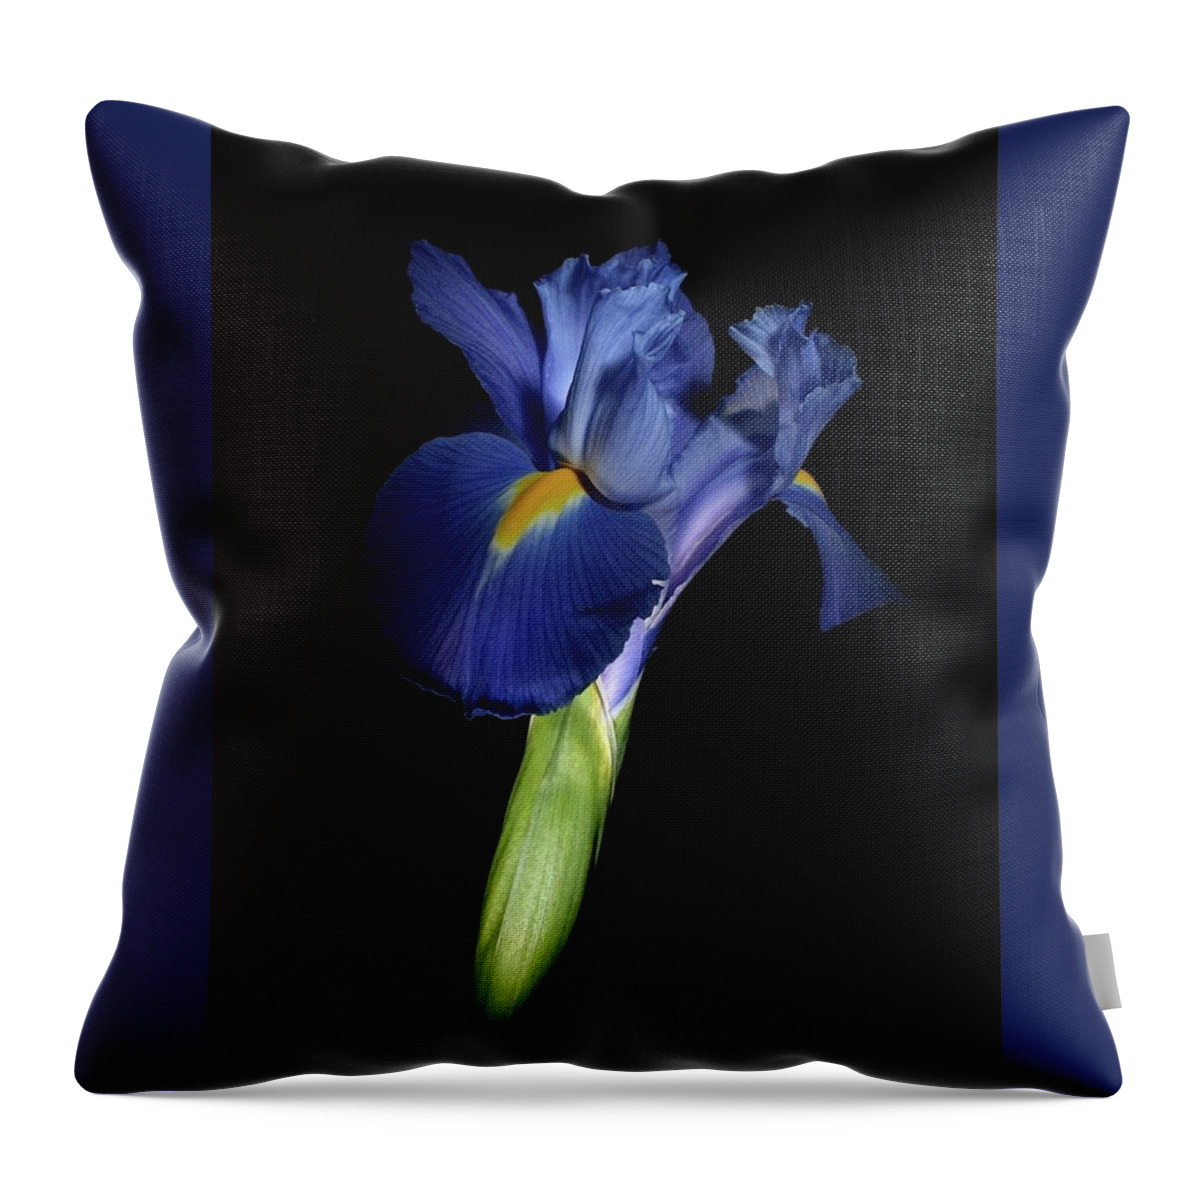 Macro Throw Pillow featuring the photograph Iris 041807 by Julie Powell